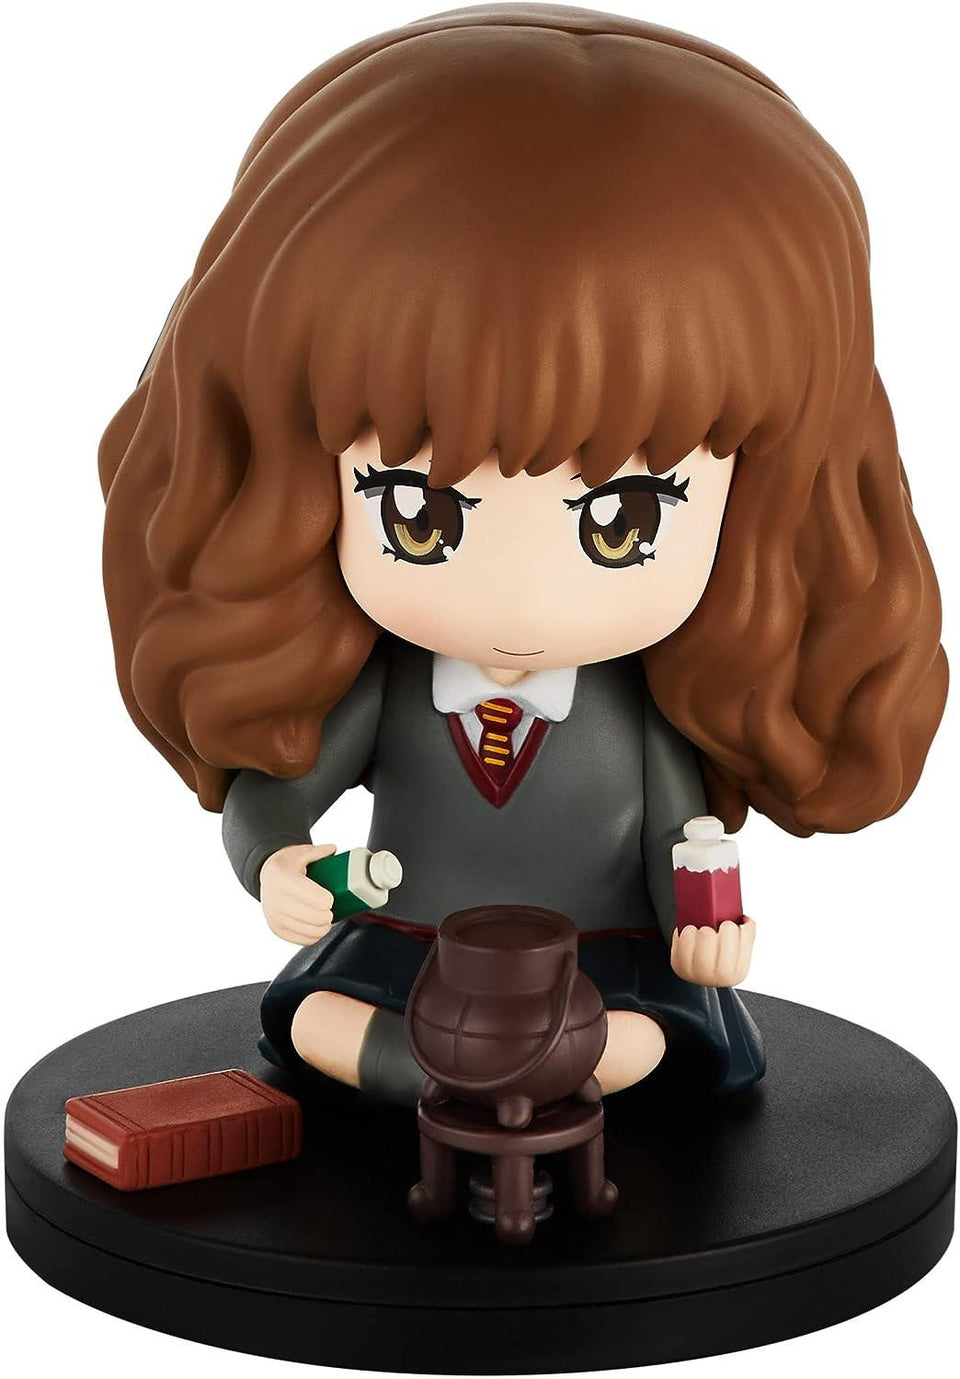 Hermione Granger Potion Mixing Ink Stamper Harry Potter Alchemy Character 3.5" PMI International